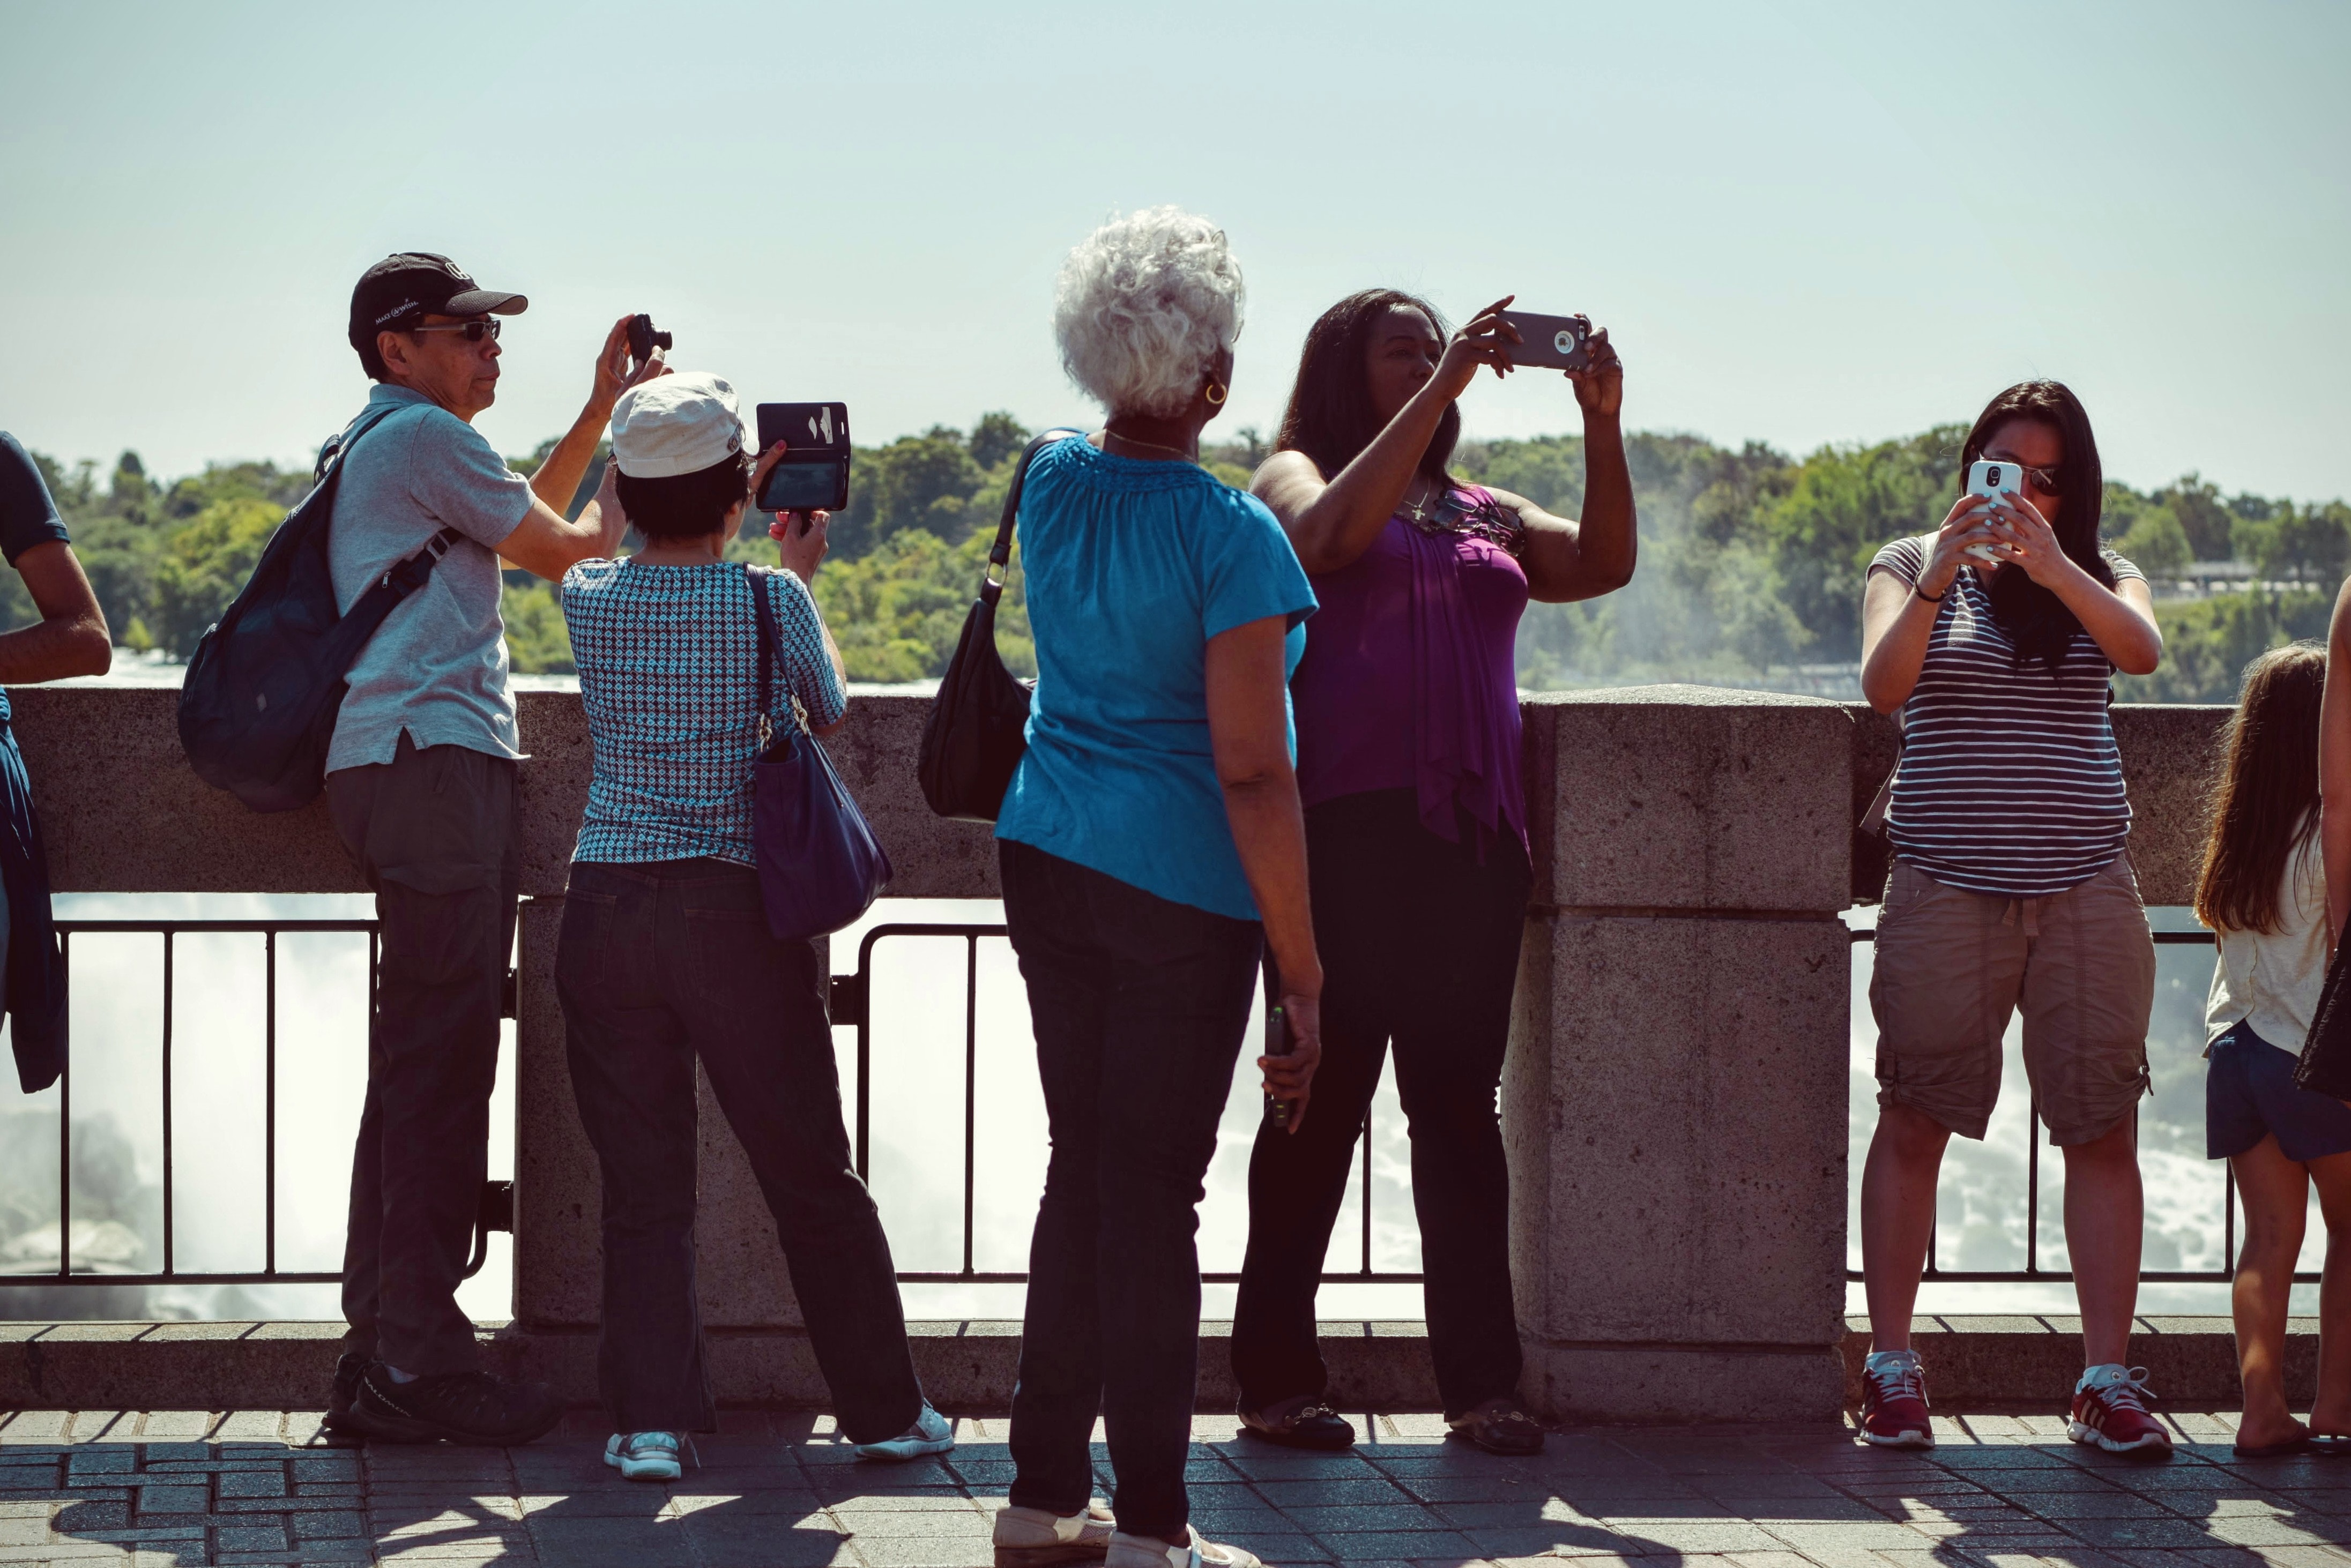 People taking pictures during daytime photo